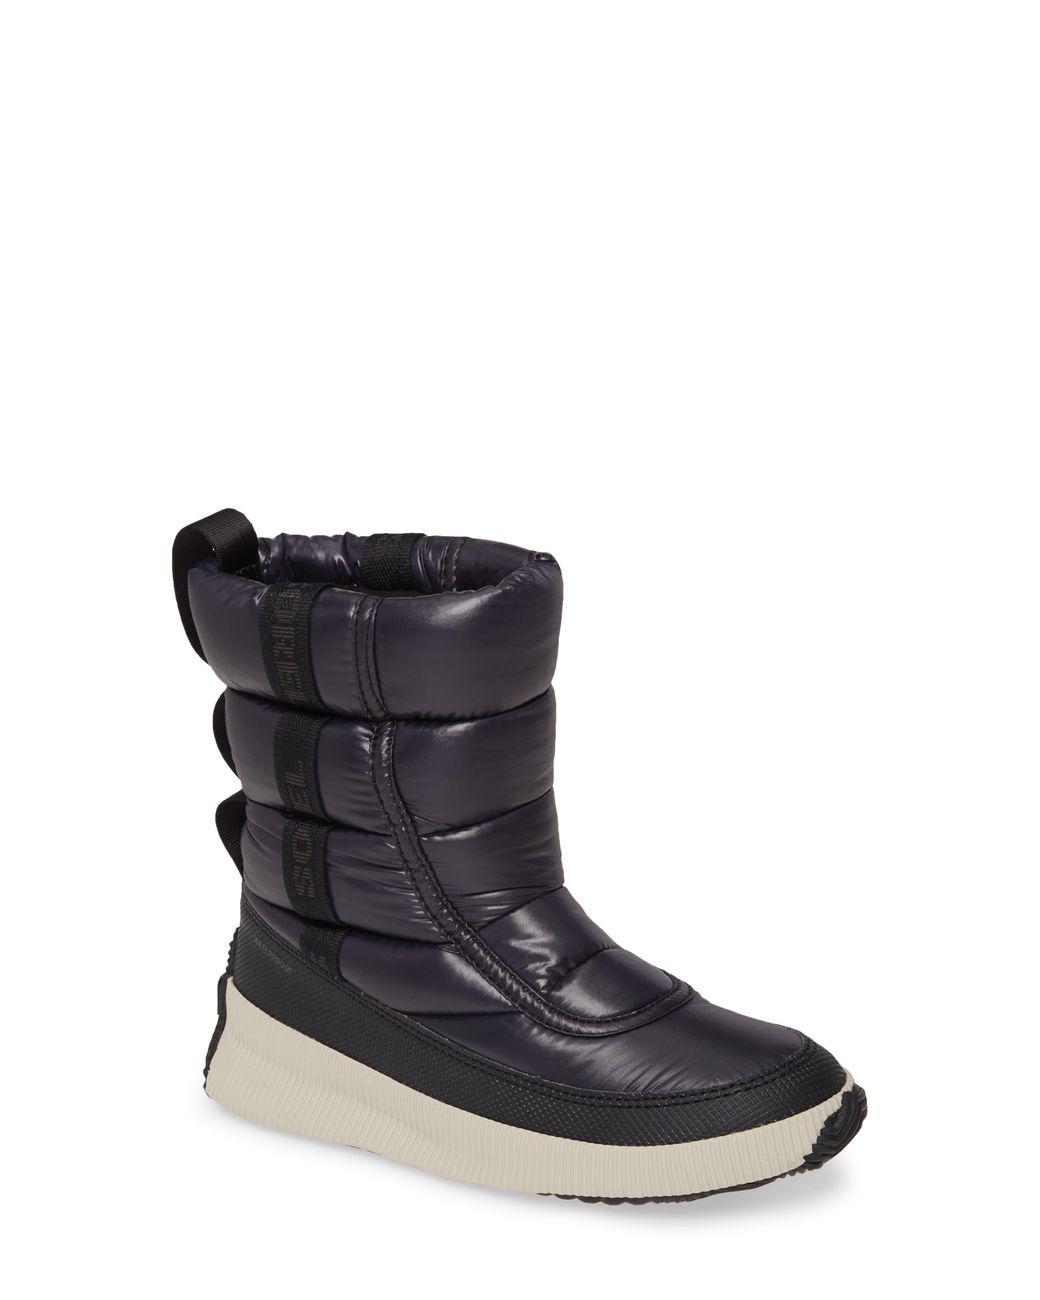 Sorel Synthetic Out N About Puffy Navy + Black Nylon Mid Boots | Lyst